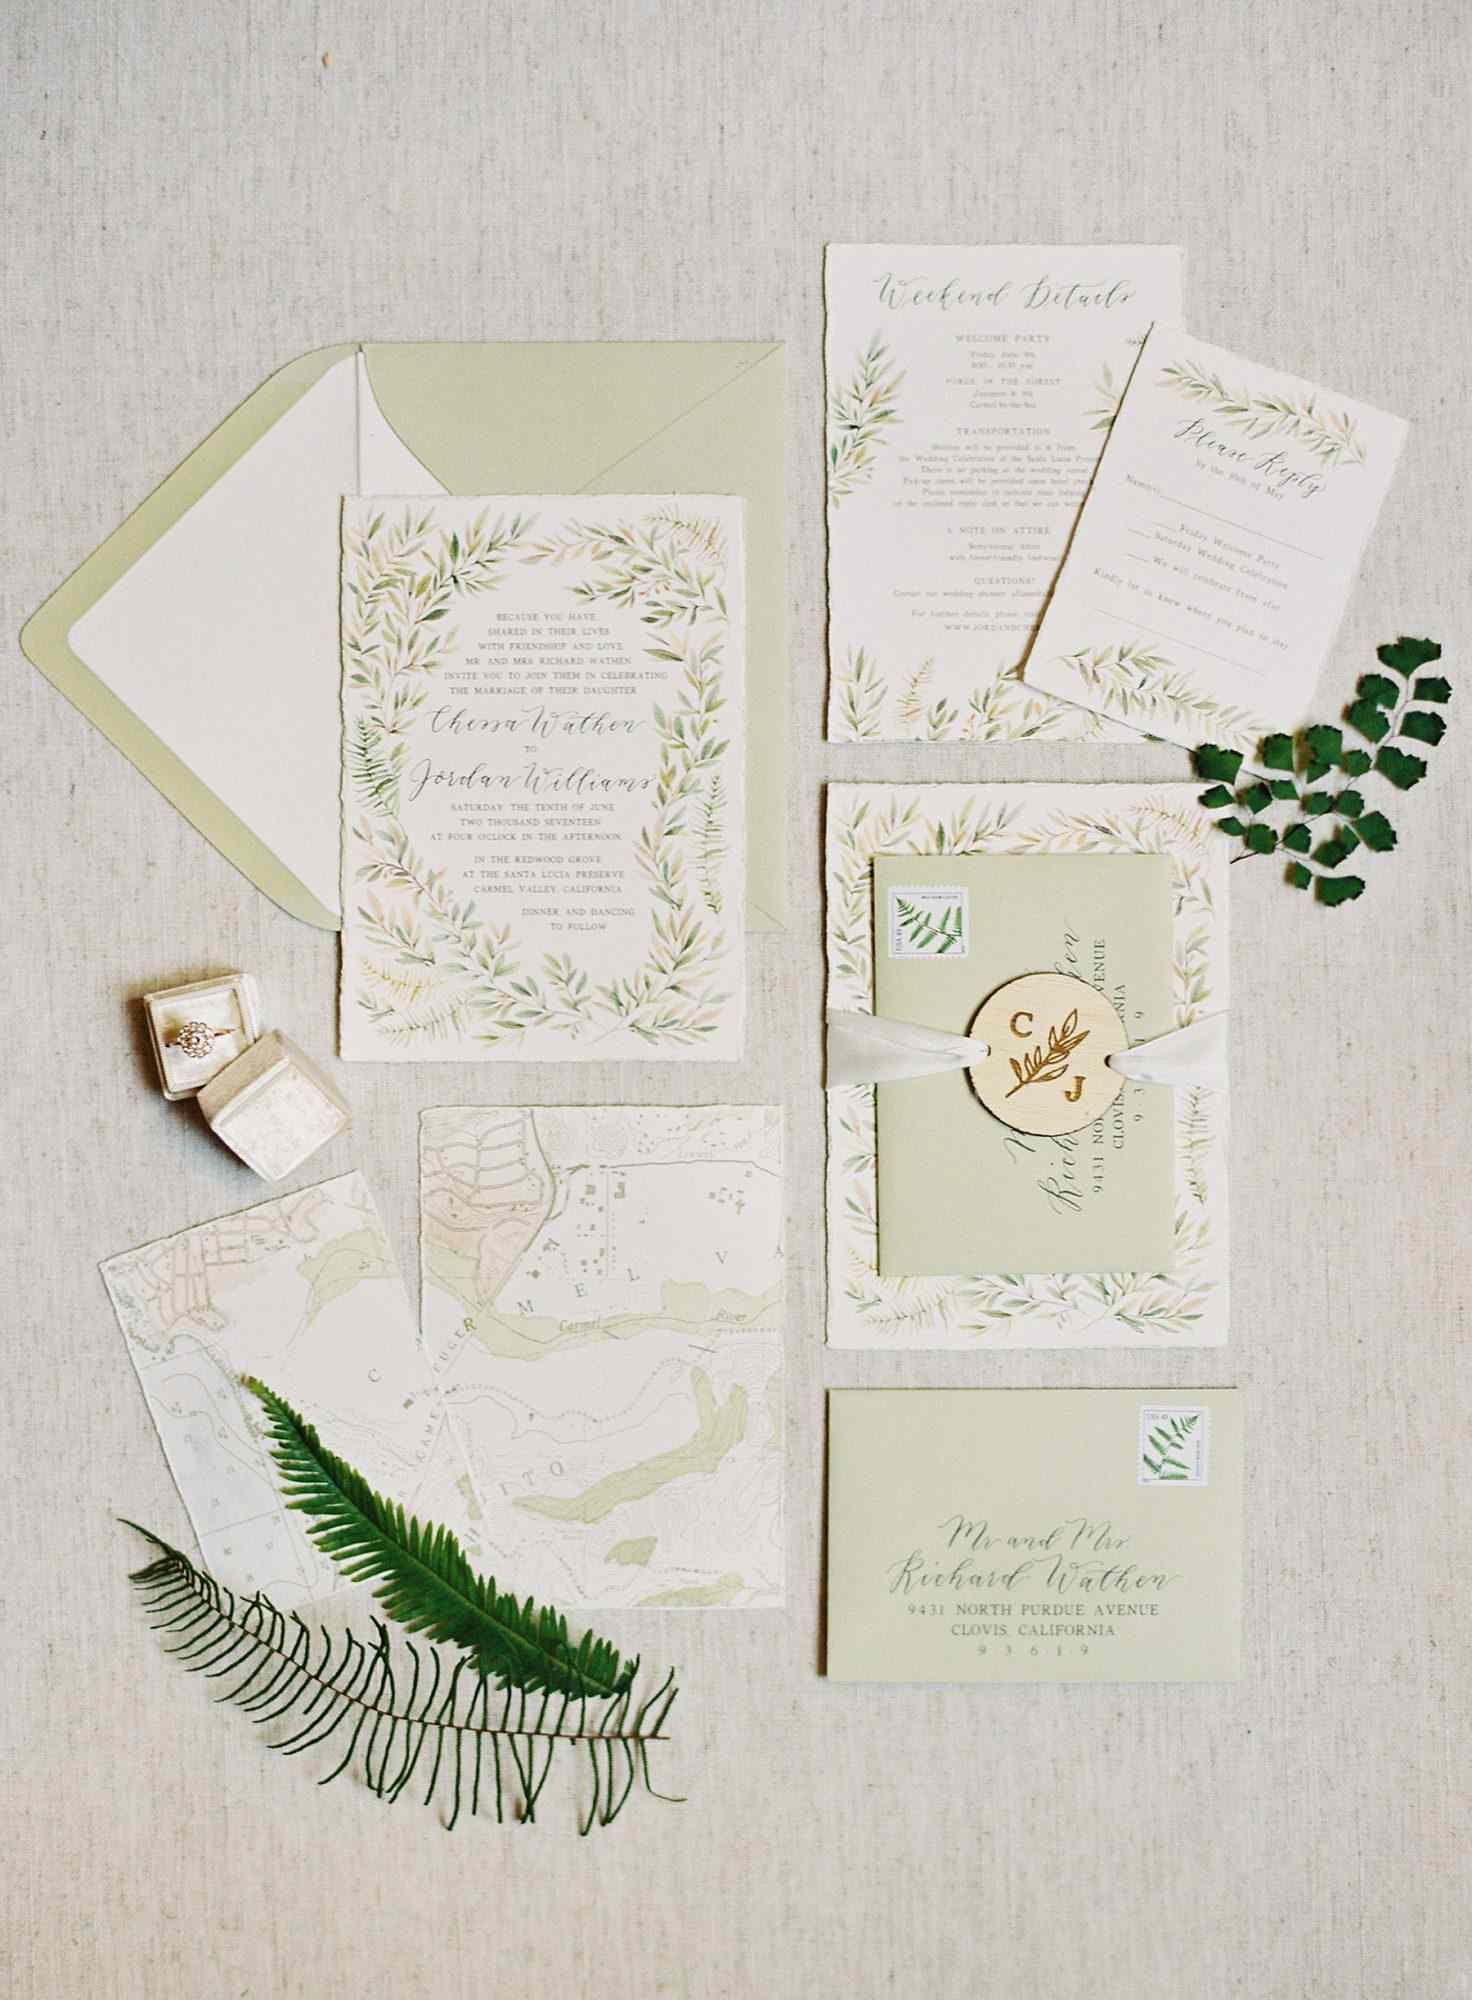 PERSONALISED RUSTIC LACE PINK,MINT & SAGE FLORAL WEDDING INVITATIONS PACKS OF 10 